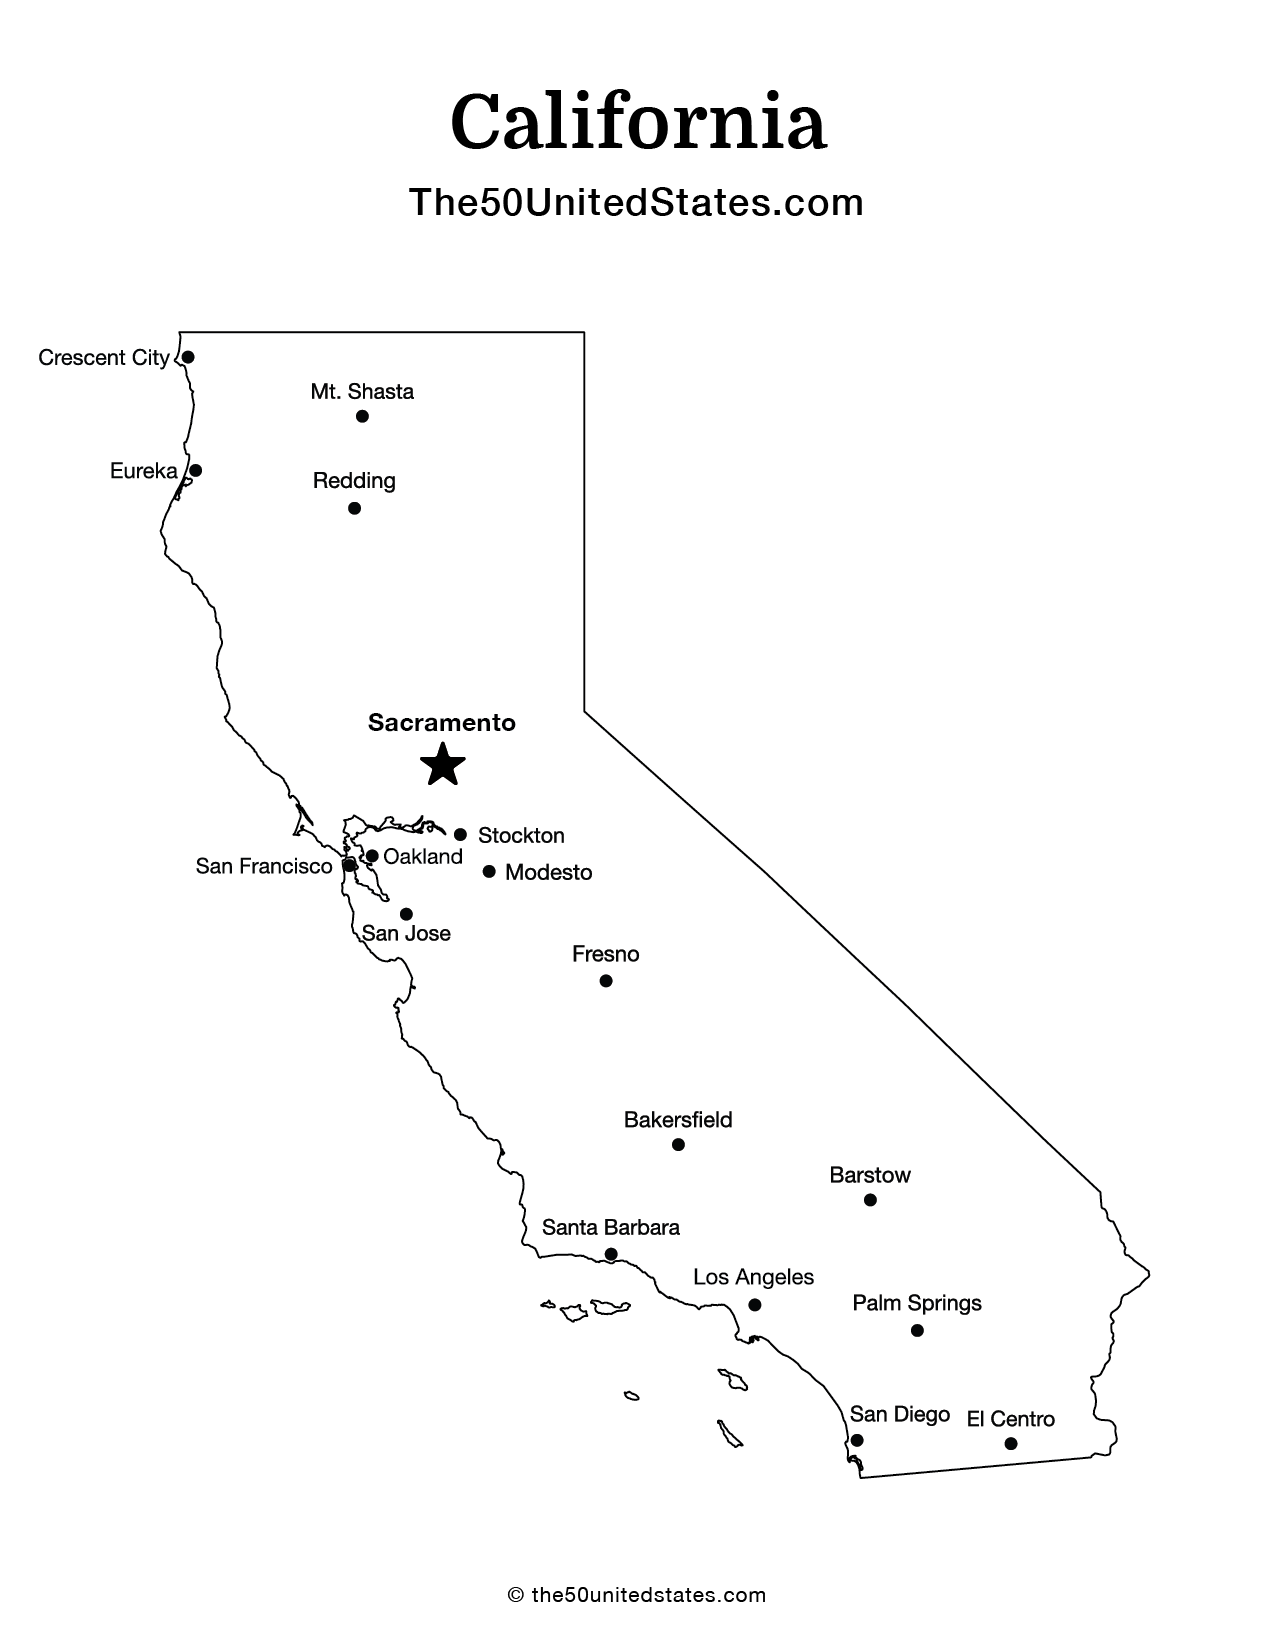 California with Cities (Labeled)